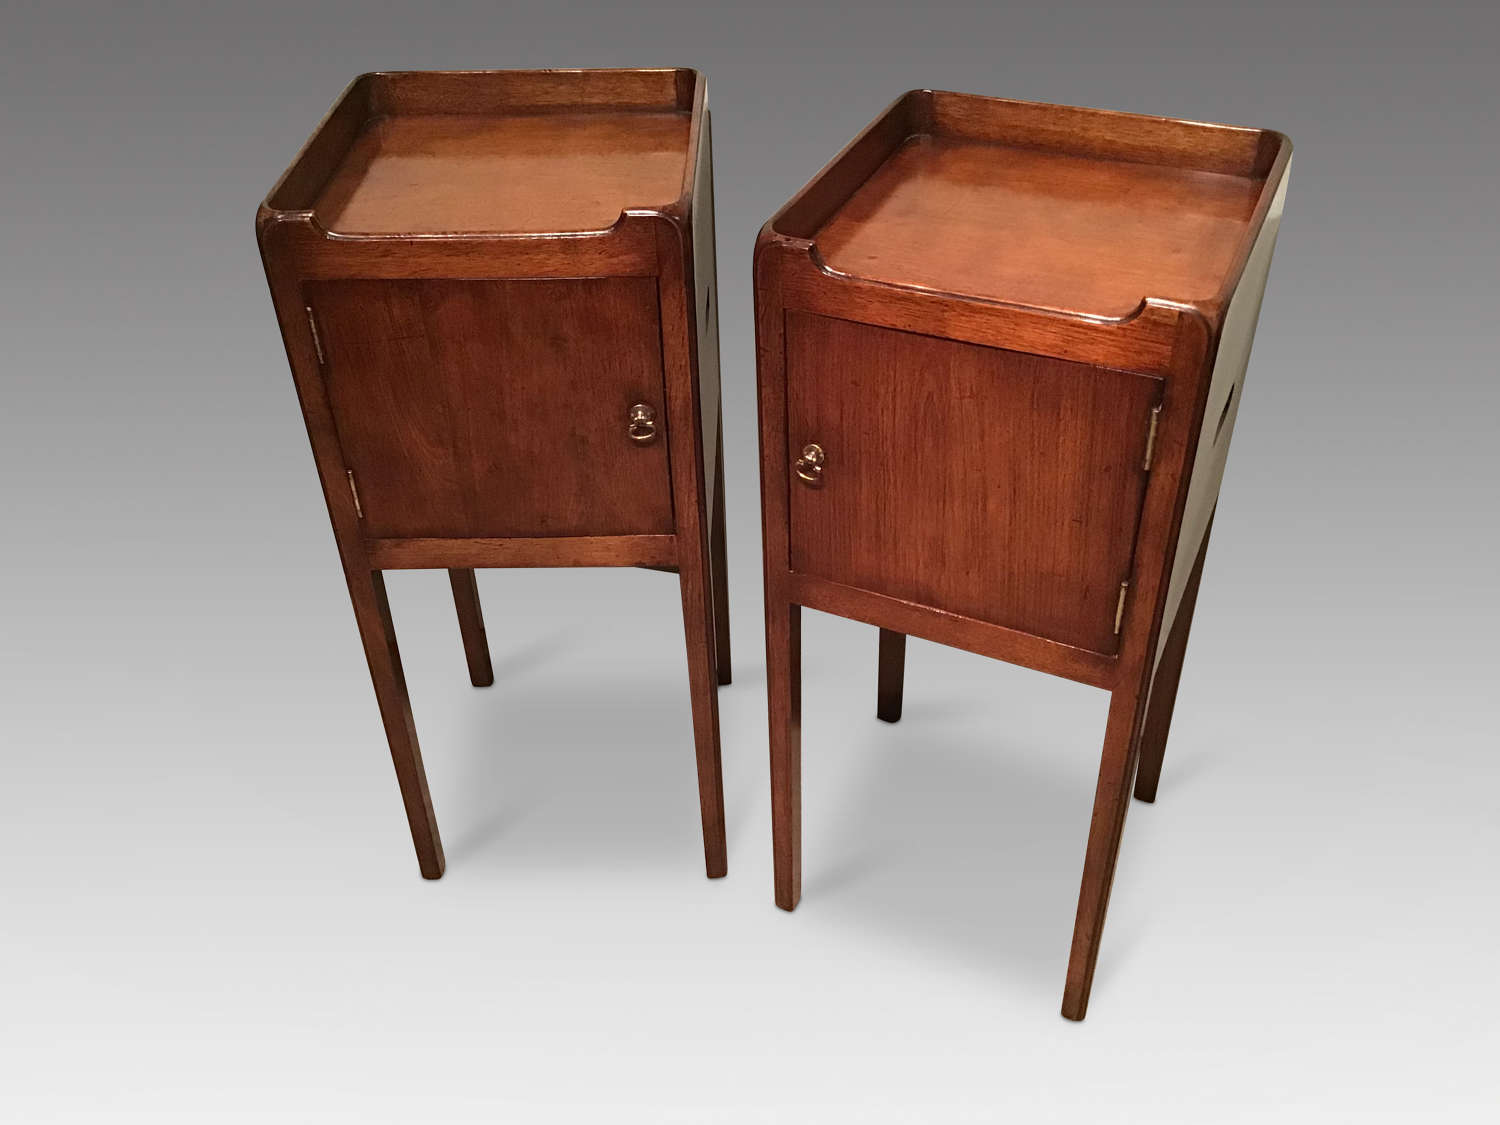 Pair of antique mahogany bedside cabinets